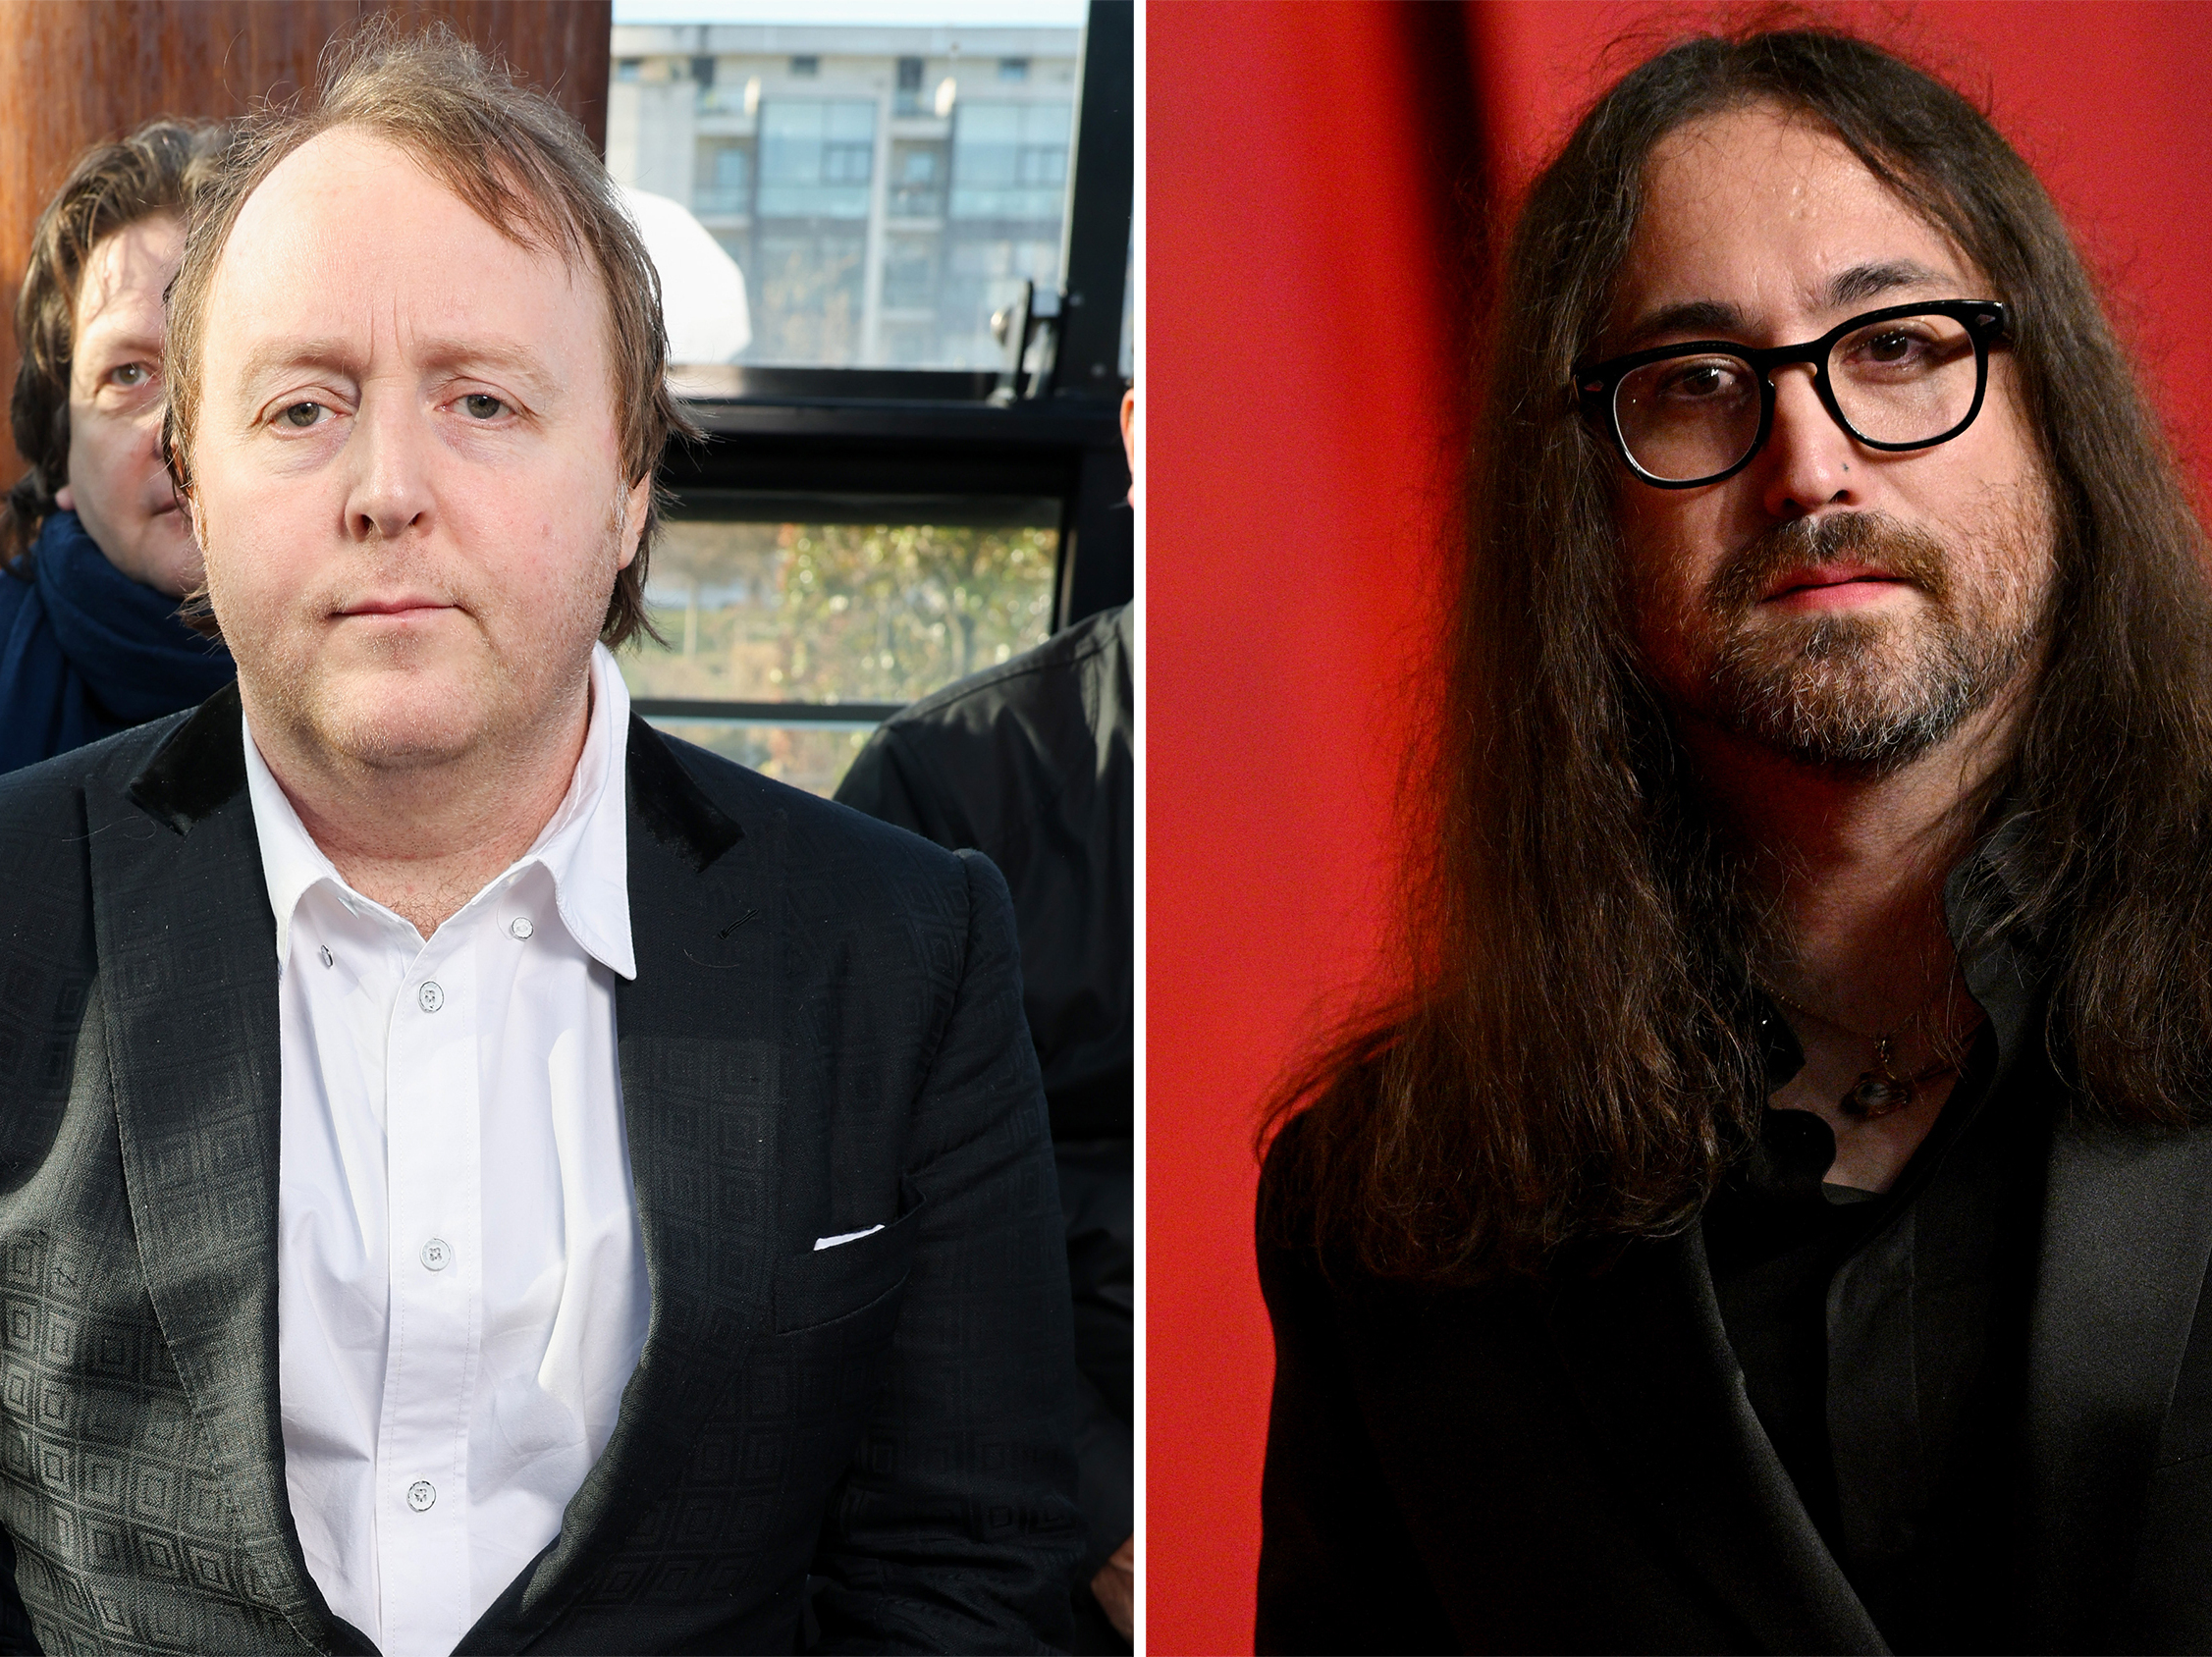 Last week, James McCartney (left), the son of Beatle Paul McCartney, released a new song called "Primrose Hill" that he co-wrote with Sean Ono Lennon, the son of John Lennon.